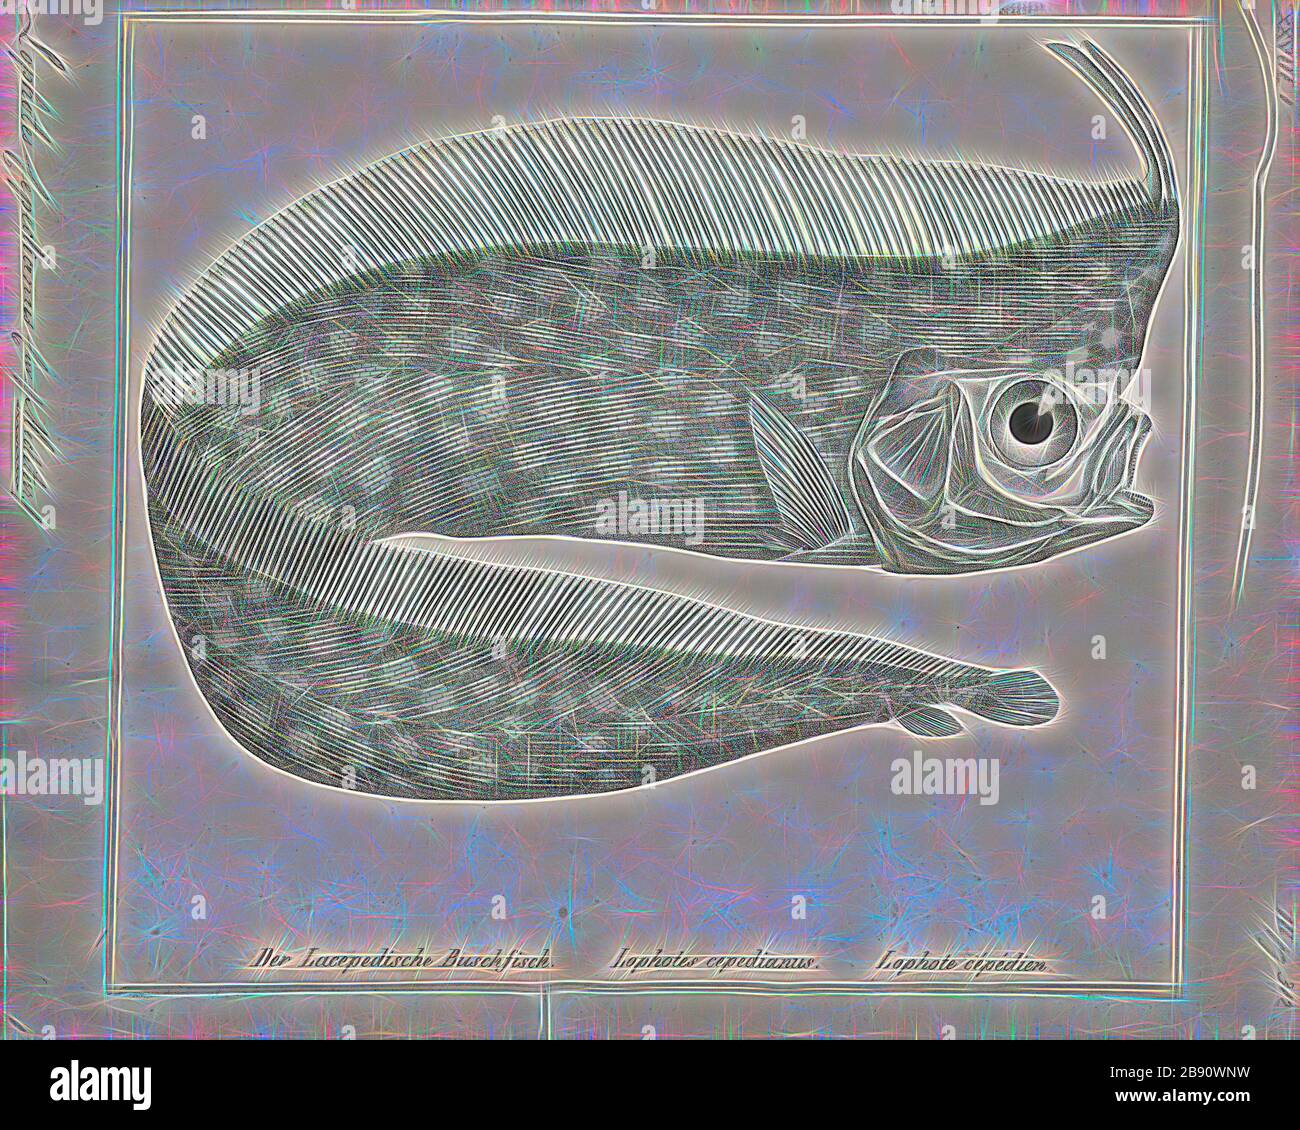 Lophotus cepedianus, Print, Lophotus is a genus of crestfishes, 1700-1880, Reimagined by Gibon, design of warm cheerful glowing of brightness and light rays radiance. Classic art reinvented with a modern twist. Photography inspired by futurism, embracing dynamic energy of modern technology, movement, speed and revolutionize culture. Stock Photo